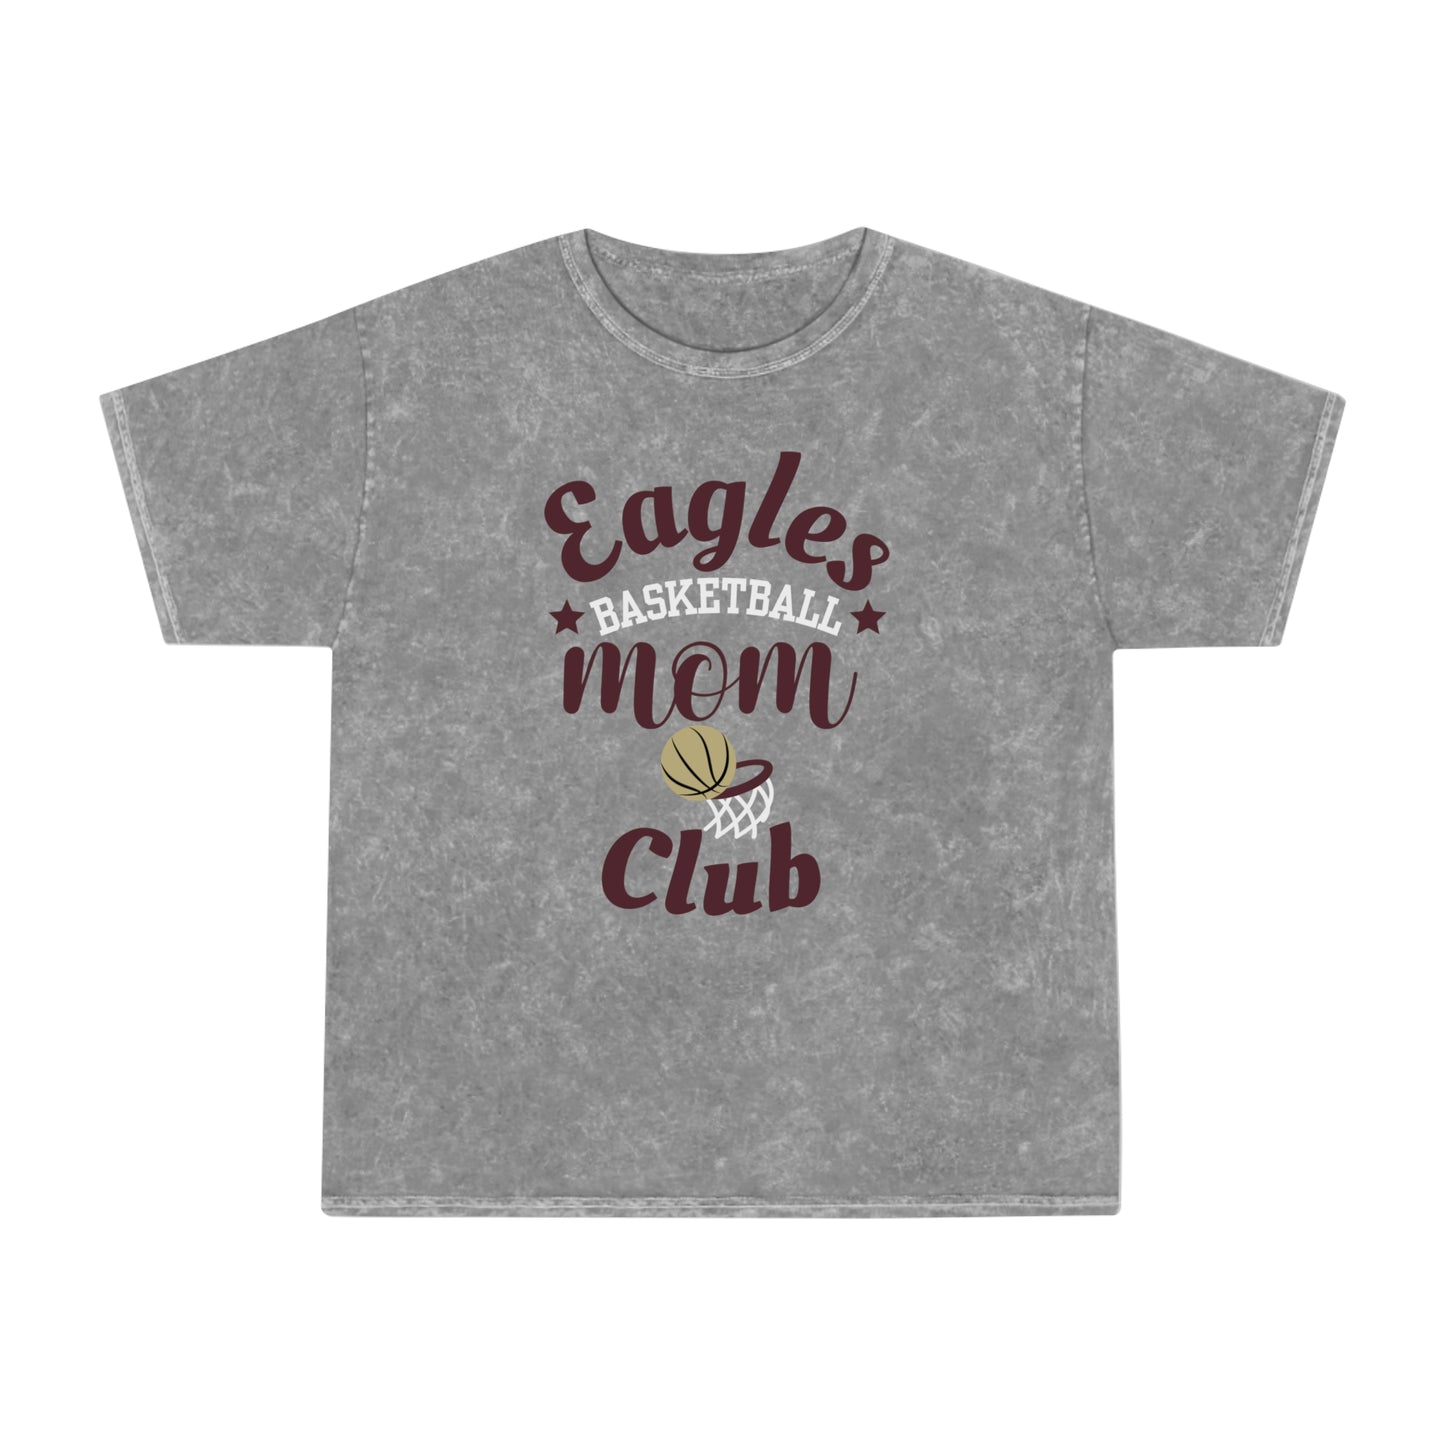 Women’s Basketball Club Mineral Wash Short Sleeve Graphic Tee - New Albany Eagles